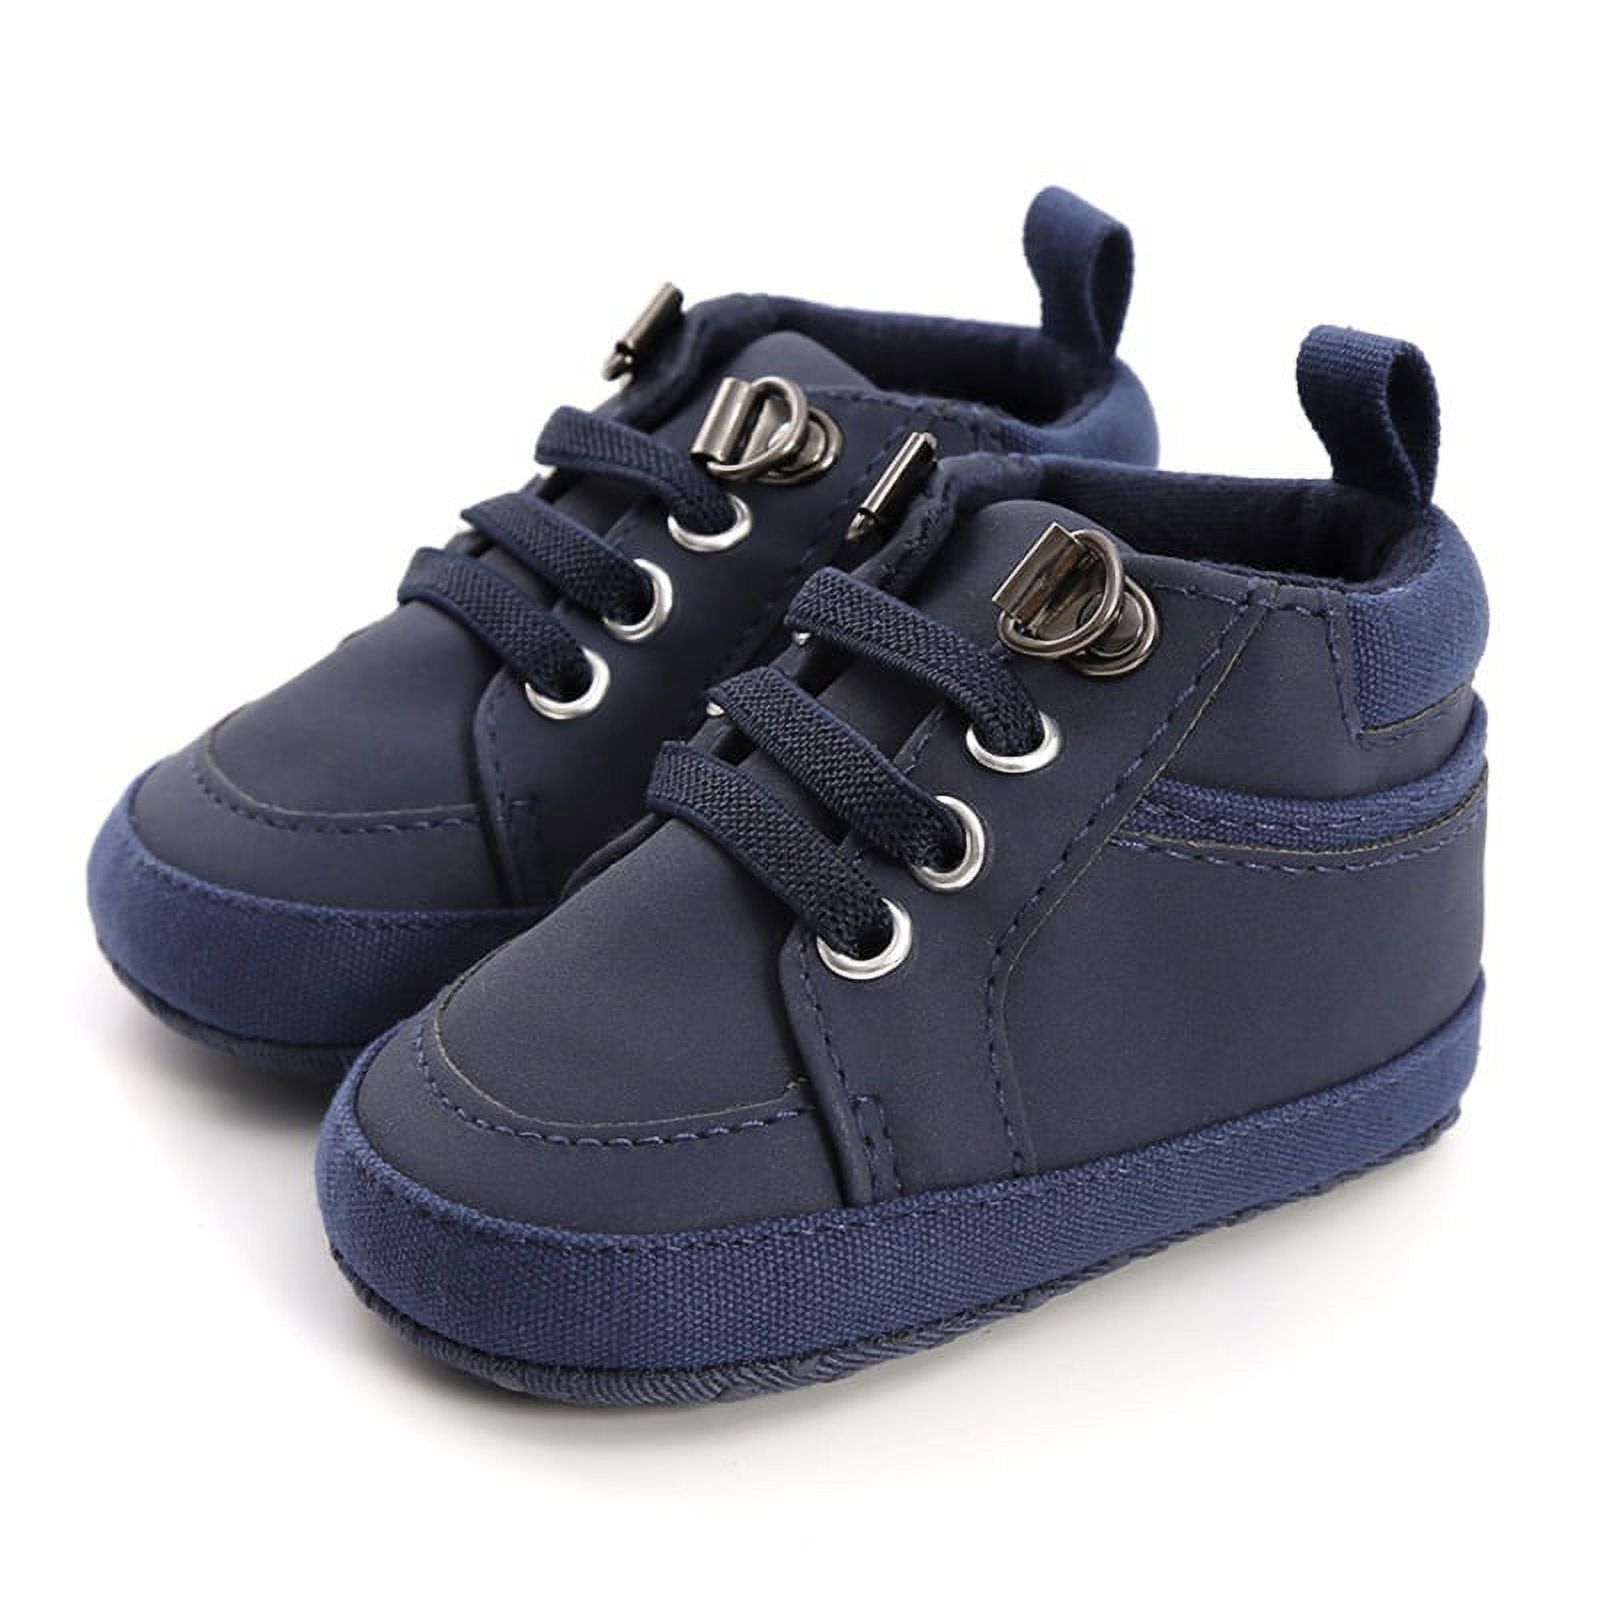 Baby Girls Boys Walking Shoes Toddler Infant First Walker Soft Sole High-Top Ankle Sneakers Newborn Crib Shoe - image 2 of 8